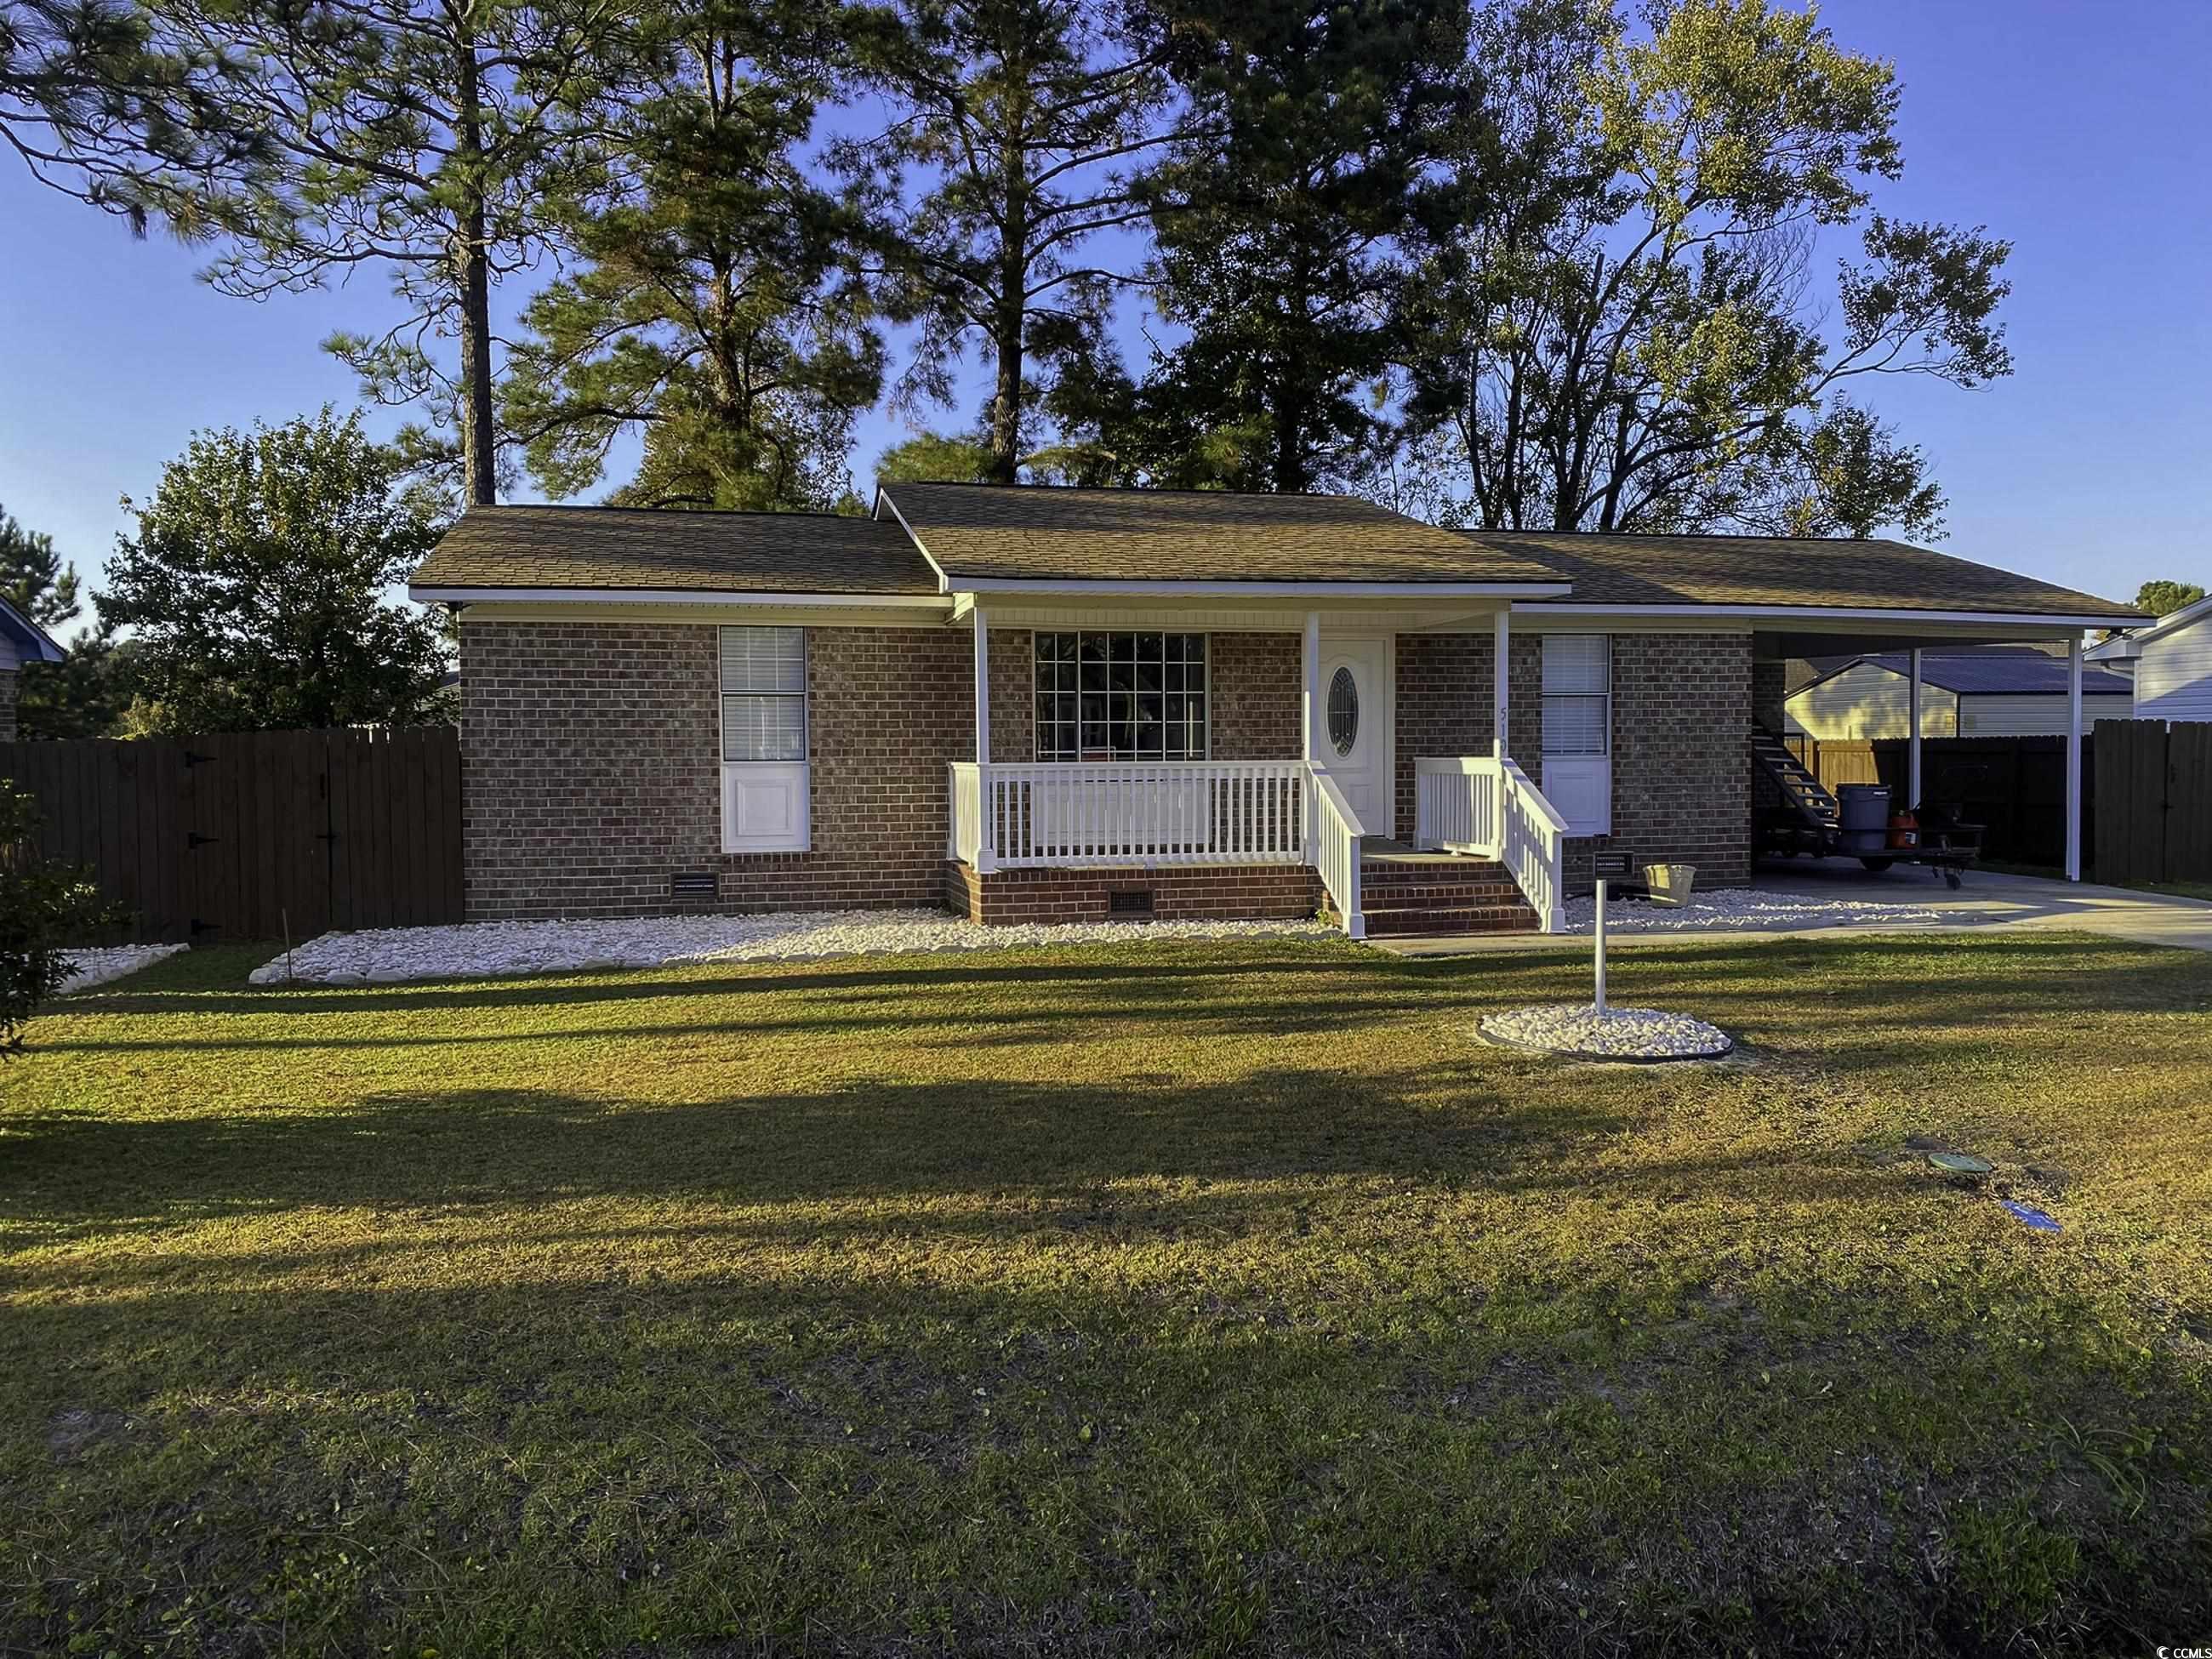 completely renovated, beautiful quaint home just seconds away from coastal university. new flooring, hvac system, all new appliances! almost every aspect of the plumbing has been replaced.